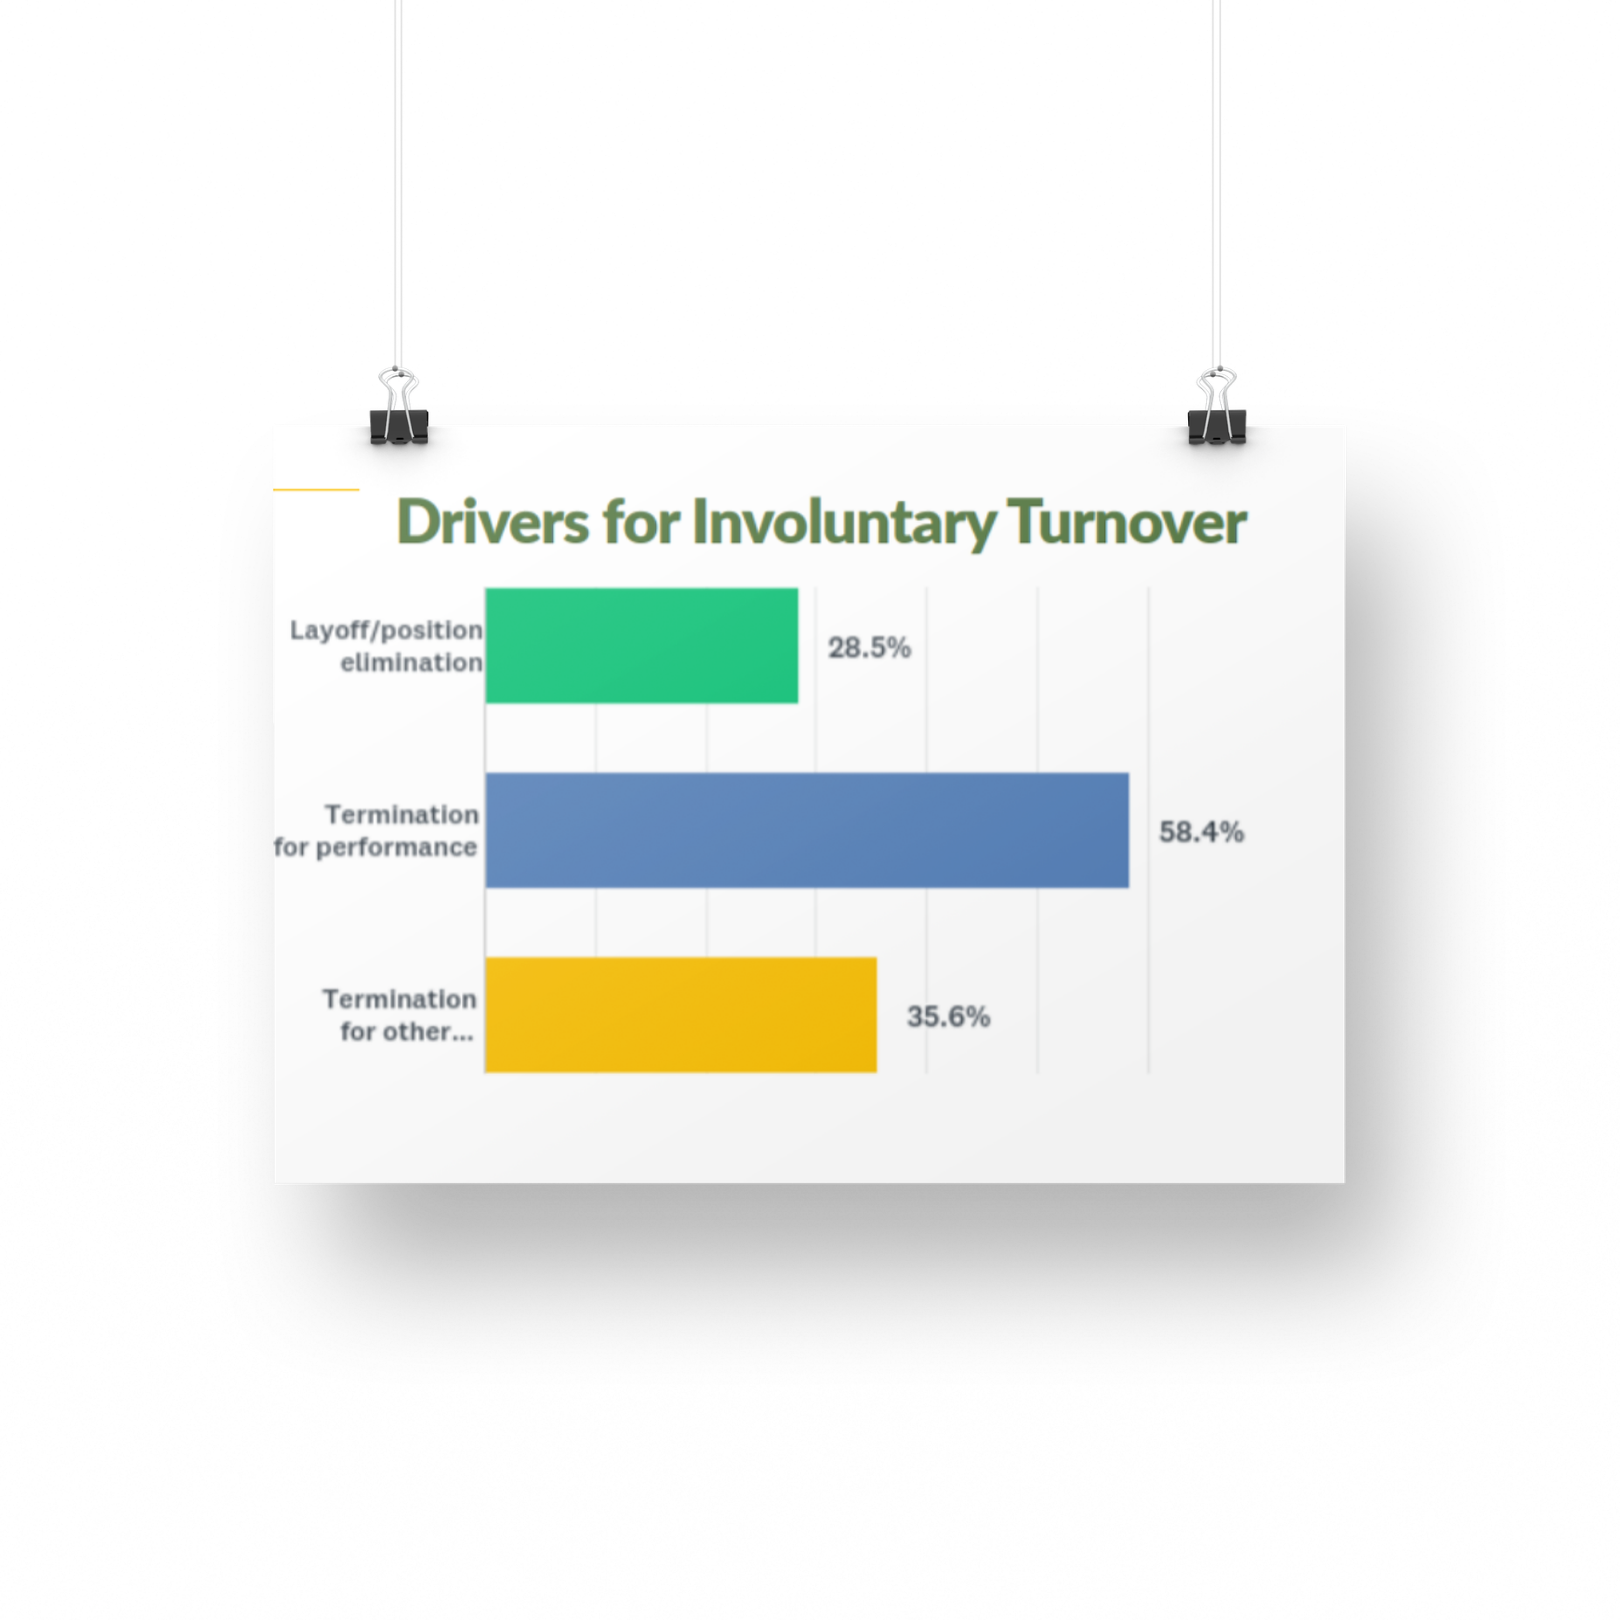 Image of Drivers for Involuntary Turnover